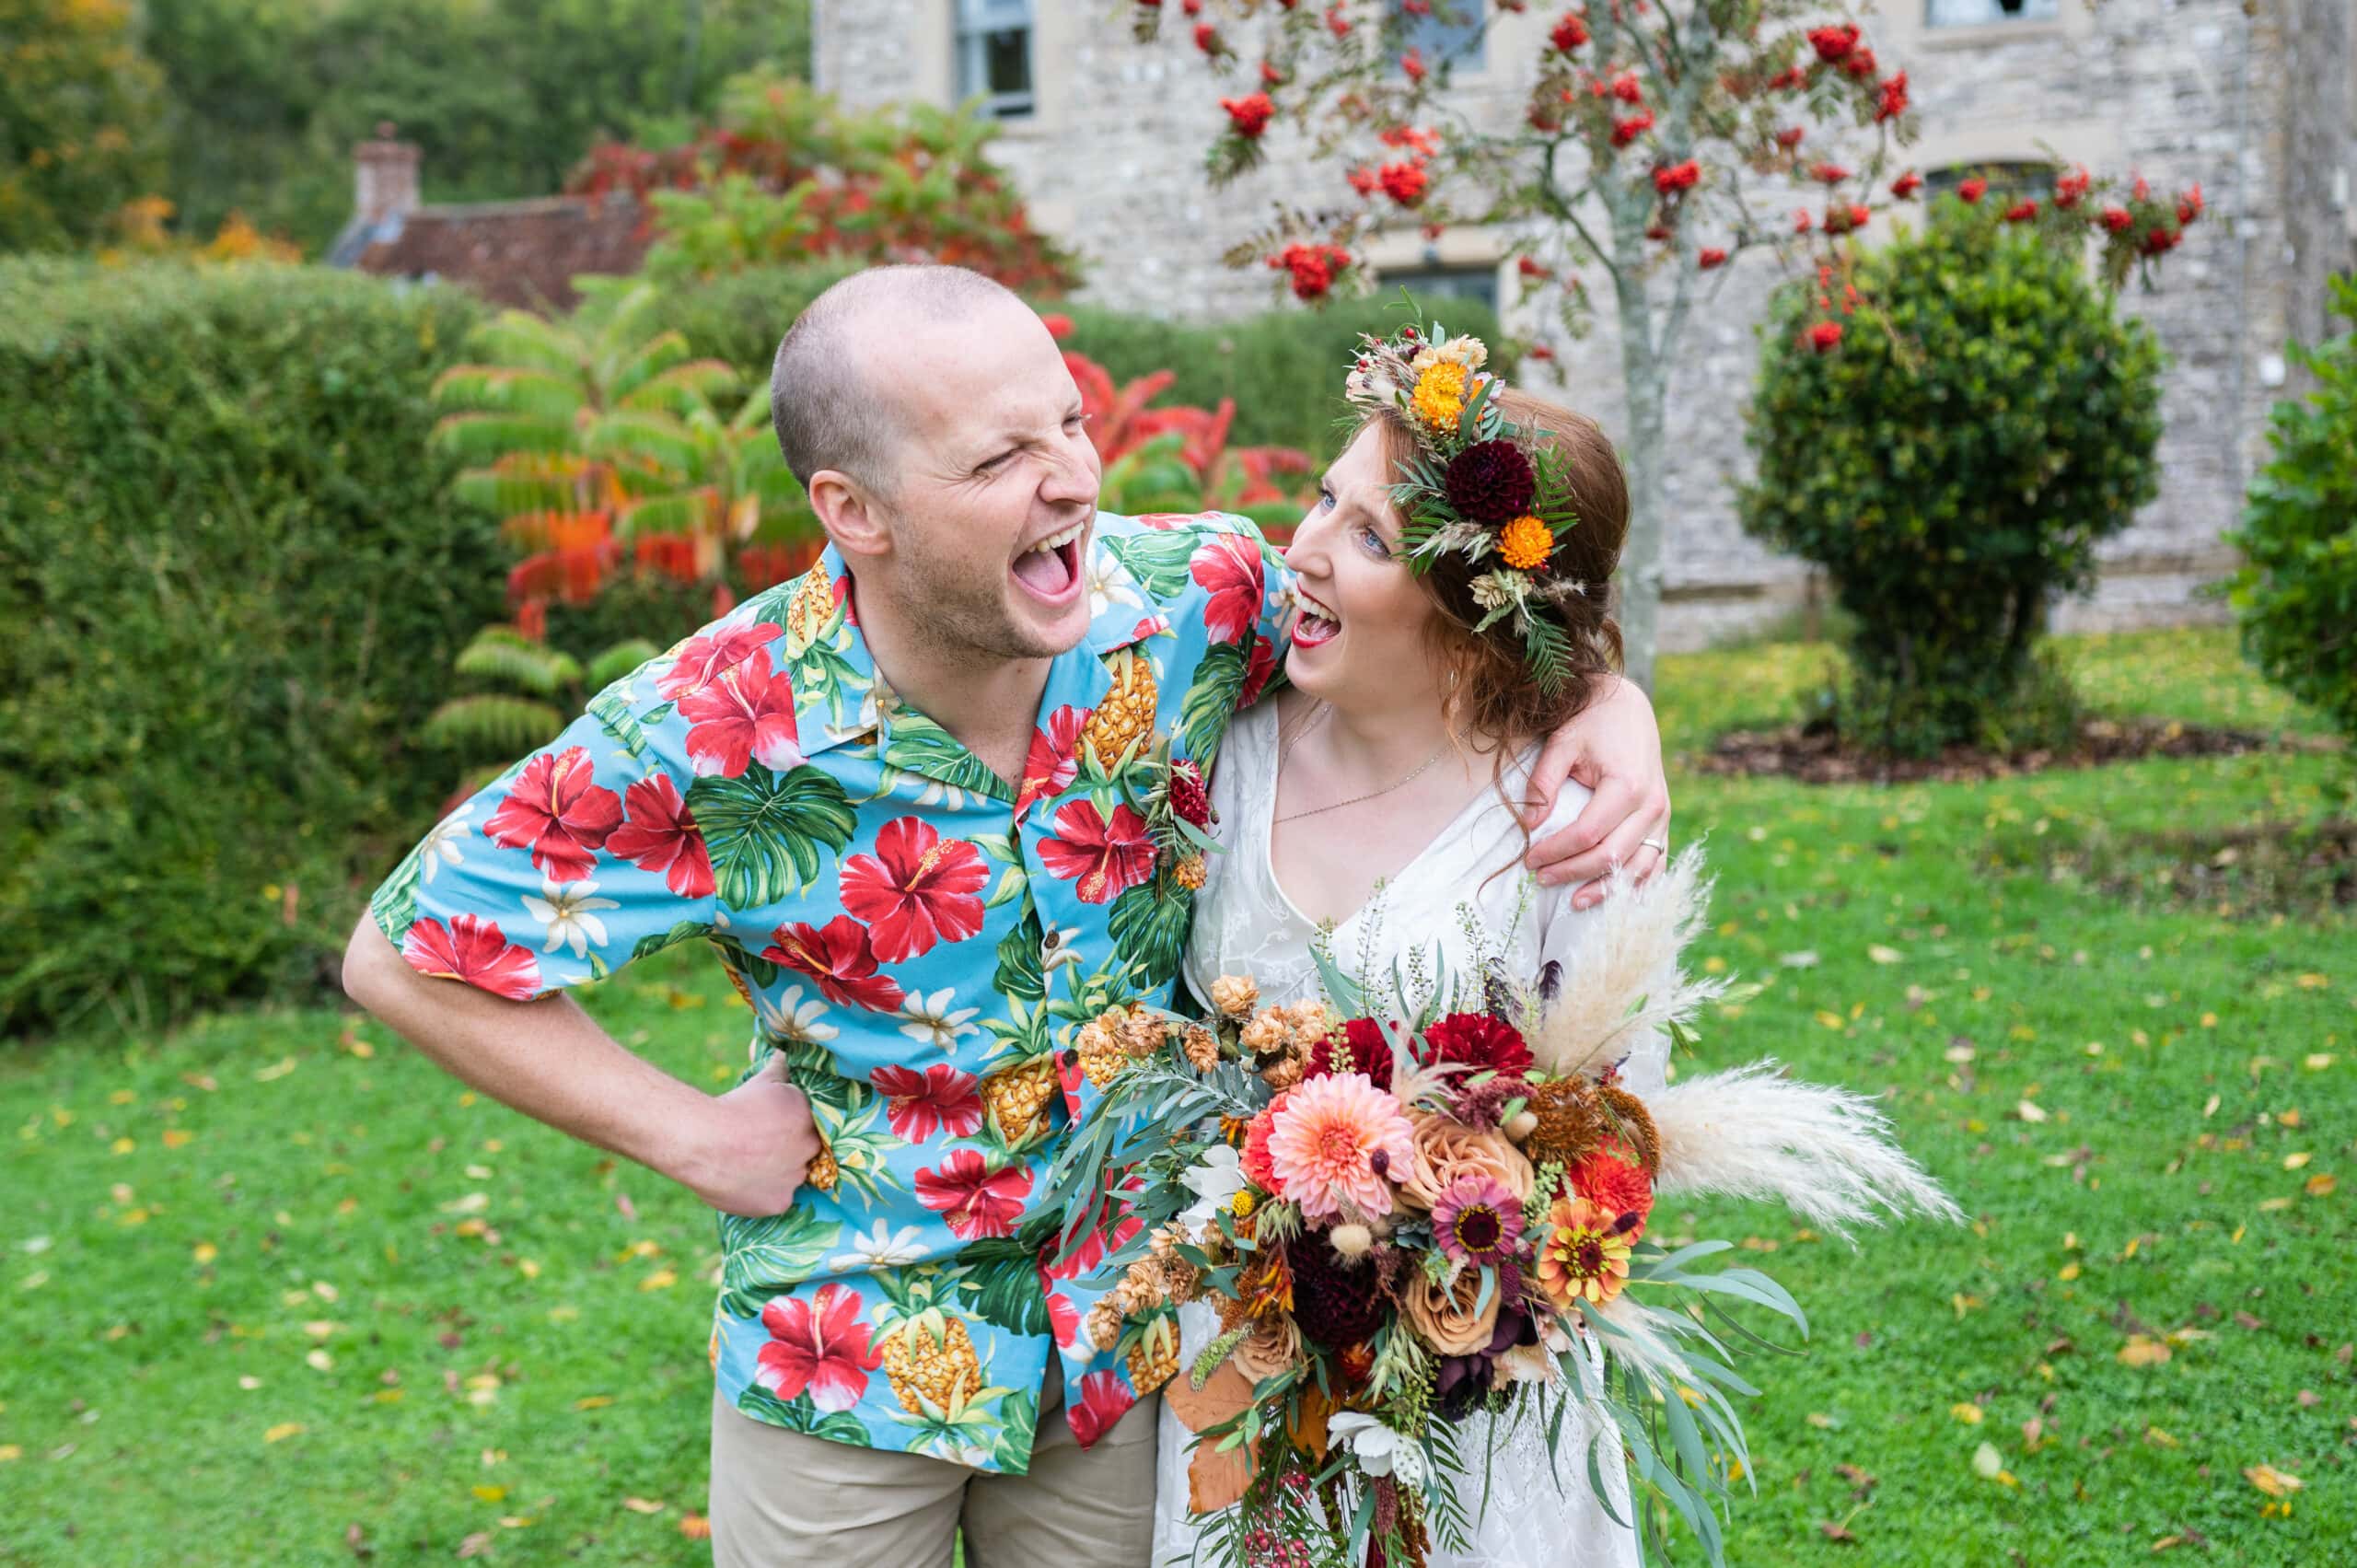 Colourfully dressed coupels laughing on their wedding day.